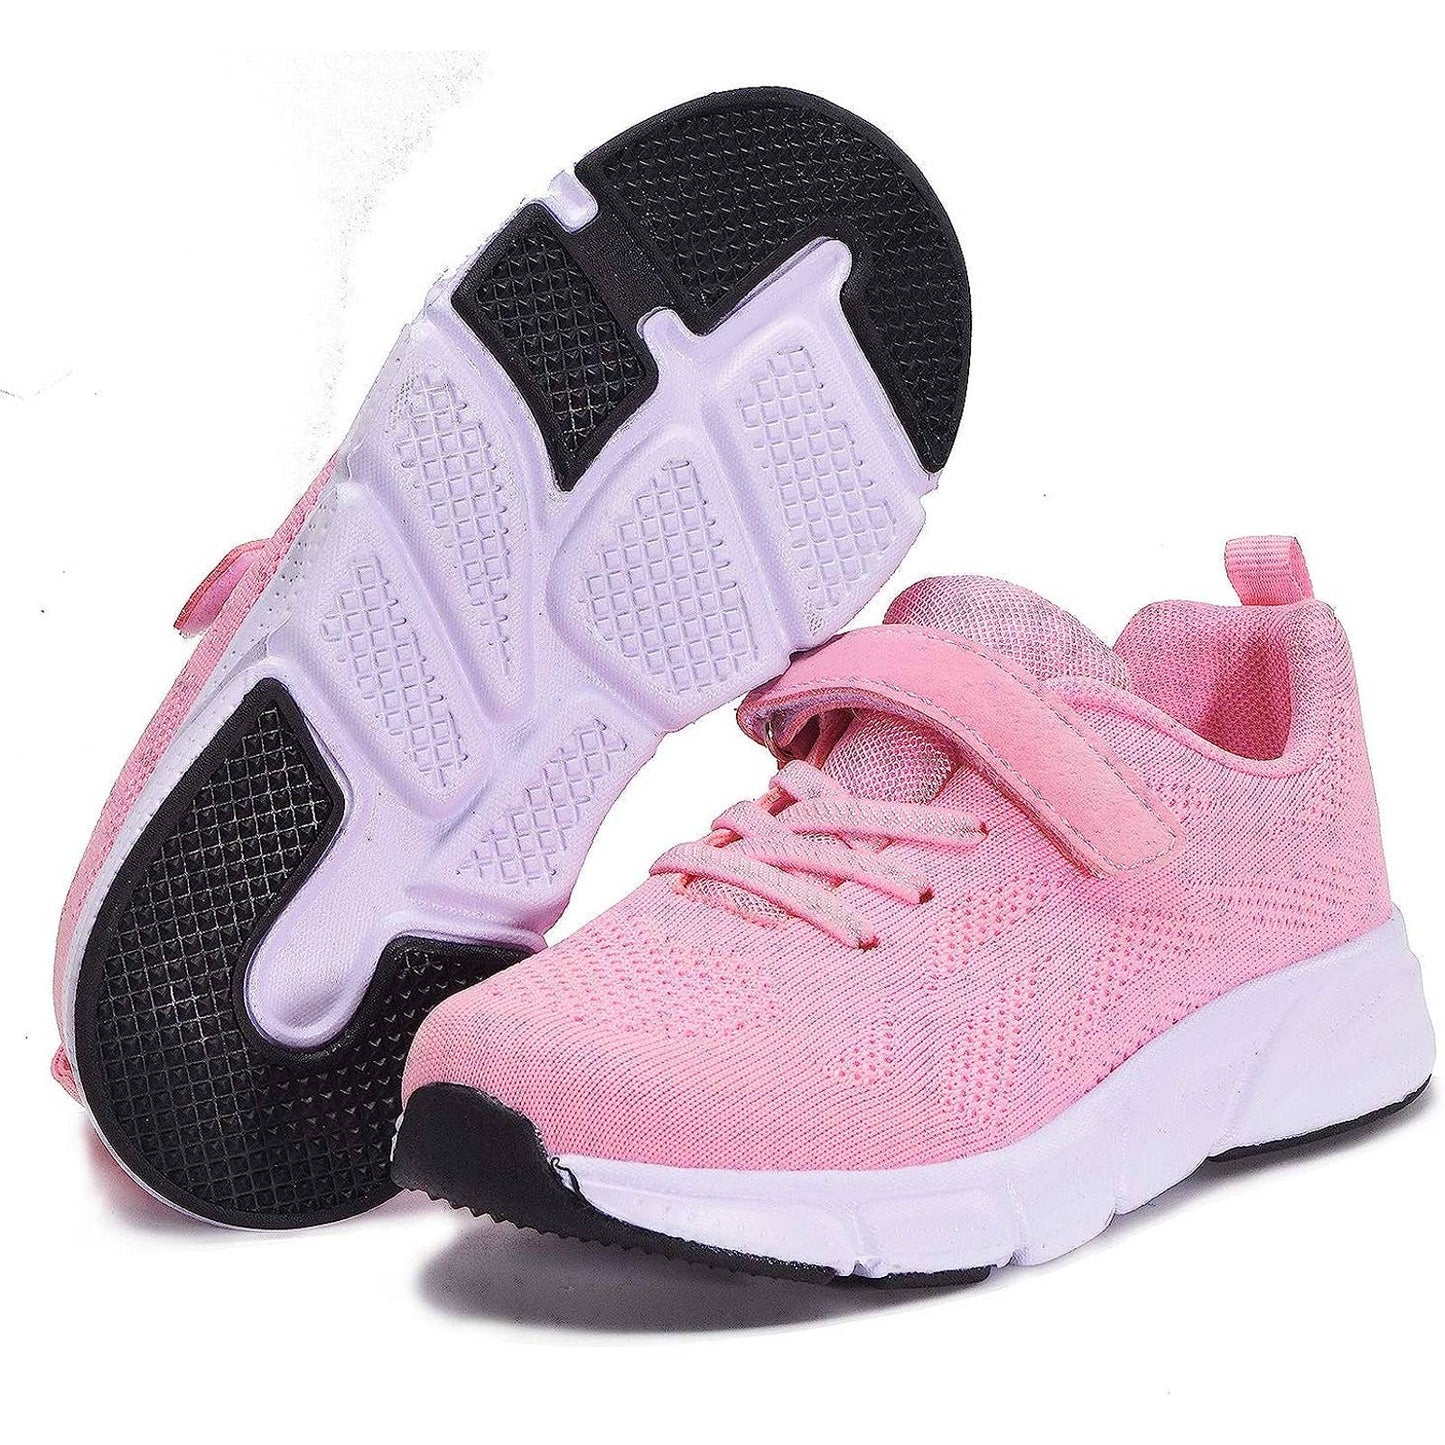 KVbabby Trainers children's sports shoes breathable trainers EU 35 / 3 US